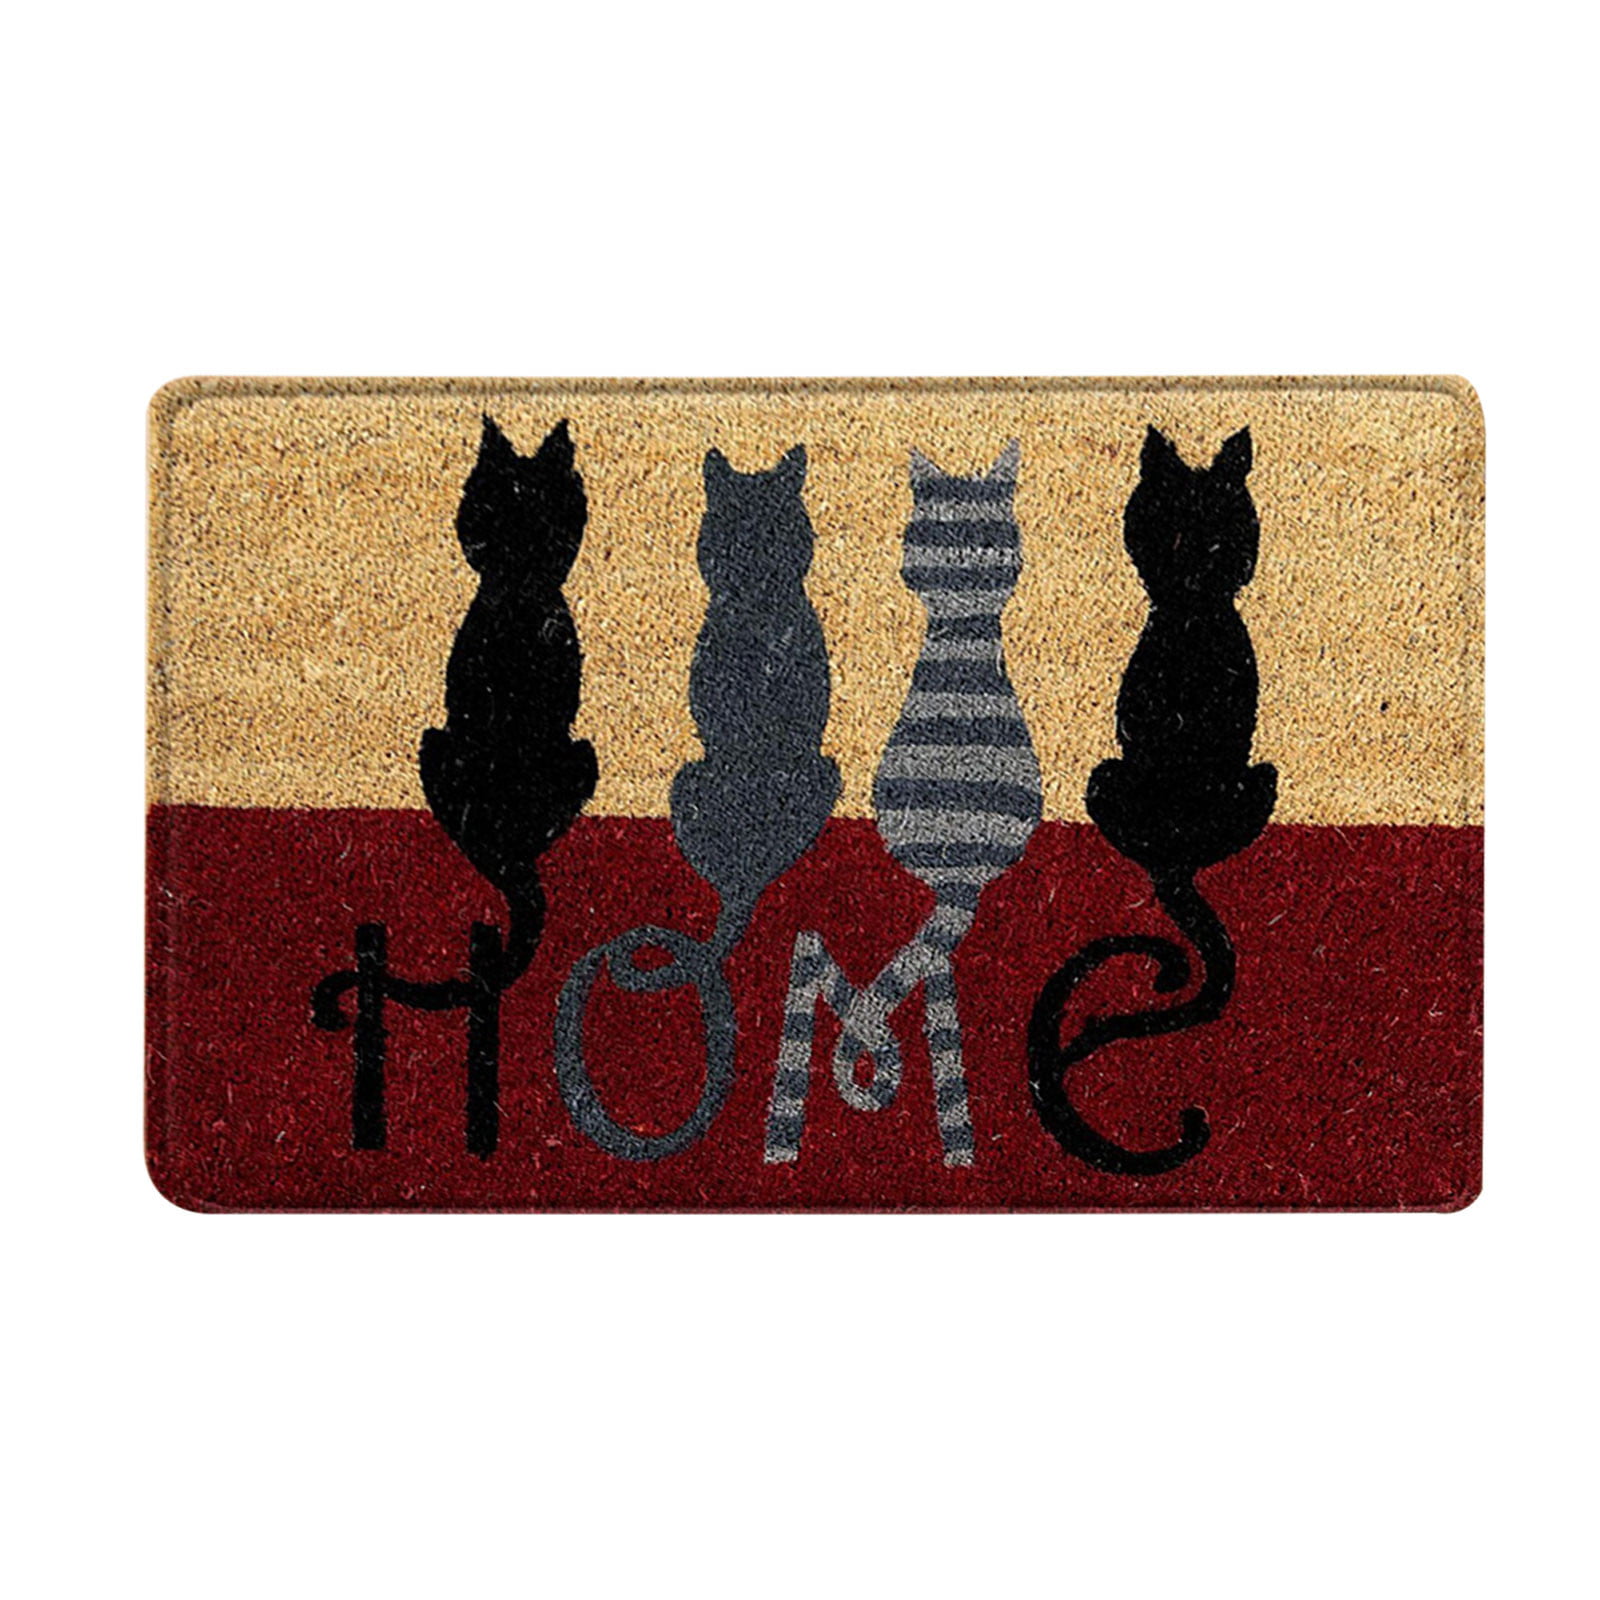 18" X 27" "CURIOUS CAT" DOORMAT WITH NONSKID RUBBER BACKING CAT WELCOME MAT 